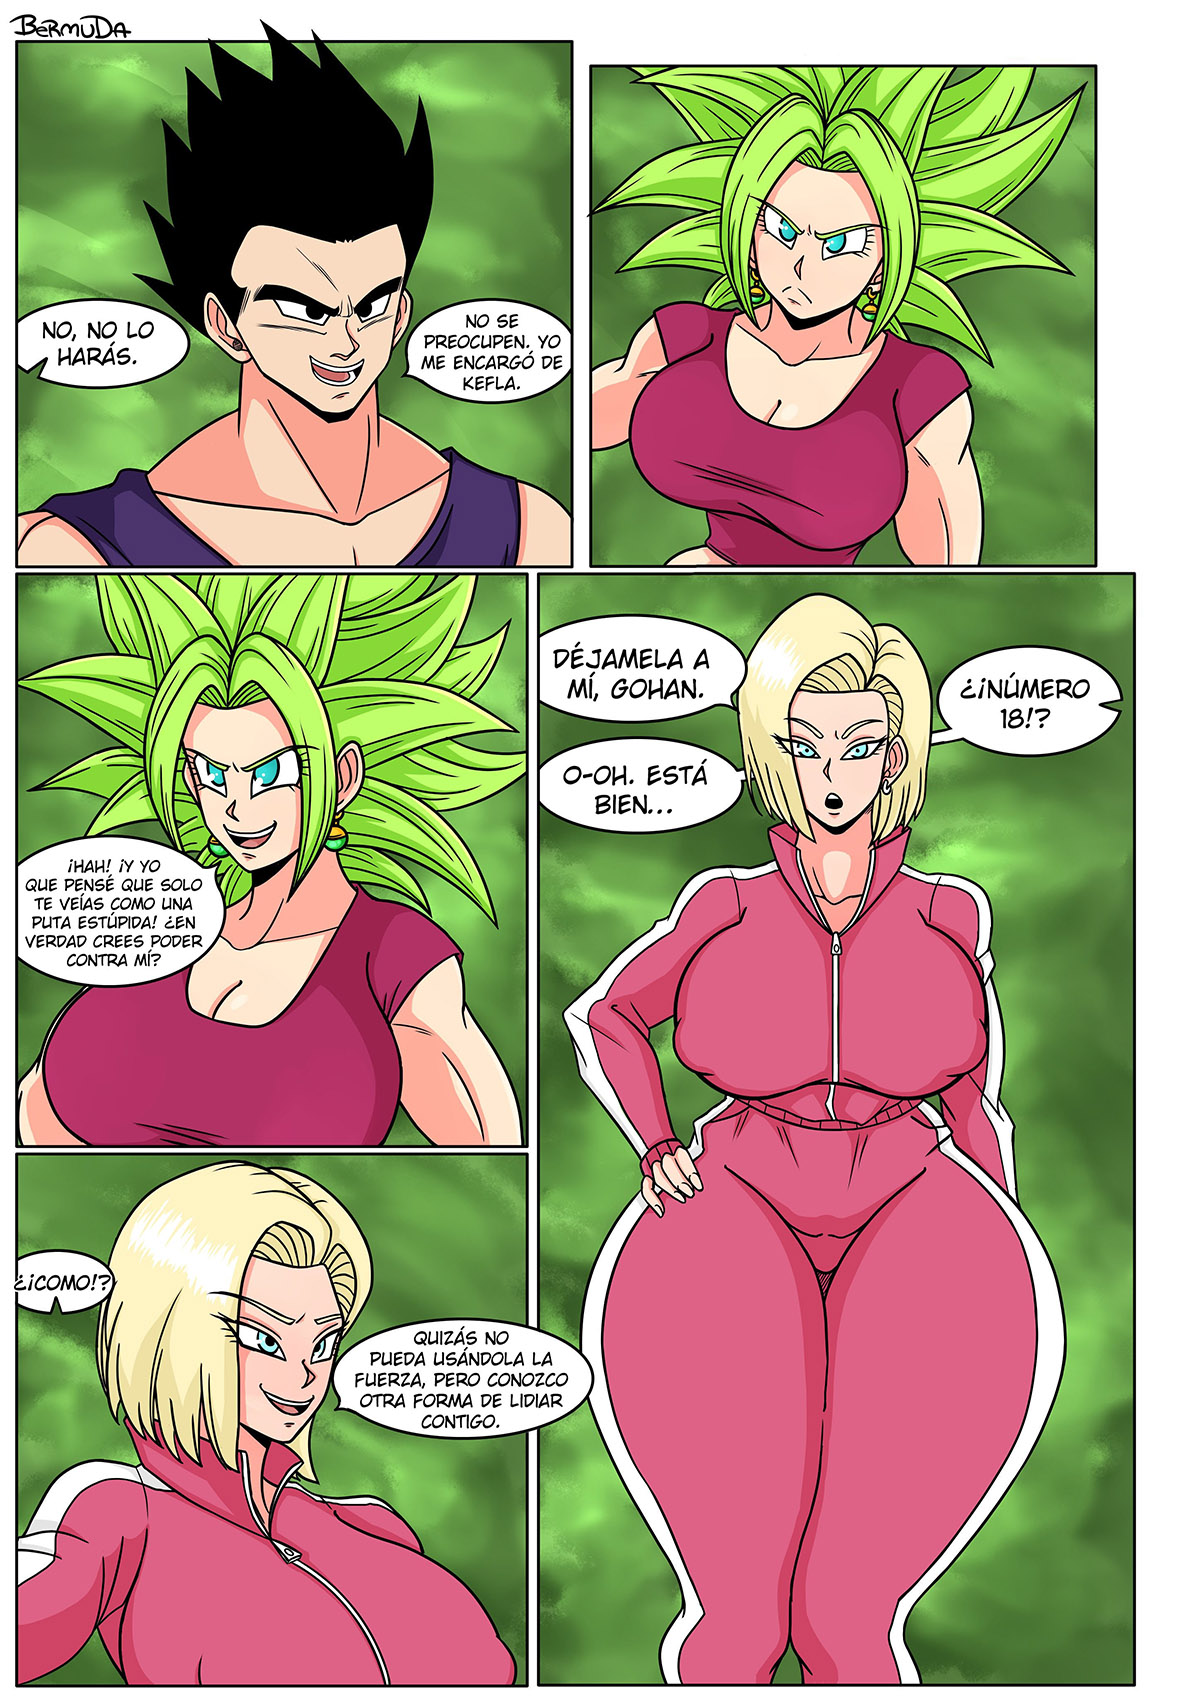 ANDROID 18 has a Plan